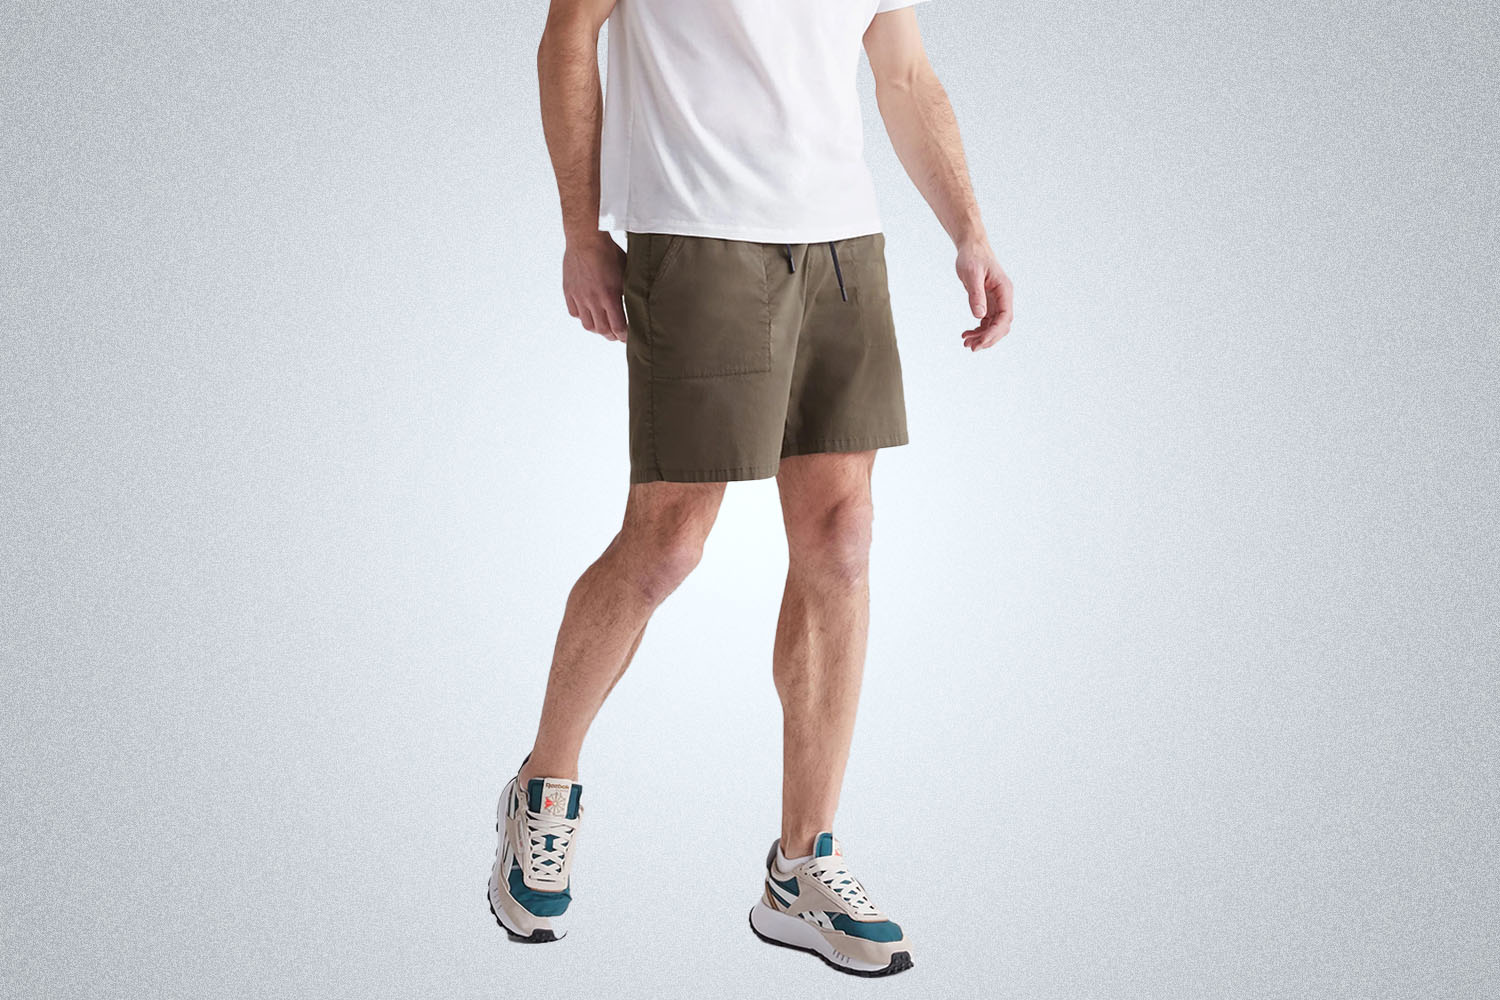 Duer-ing it well in the DUER Pants and Shorts - Run Oregon